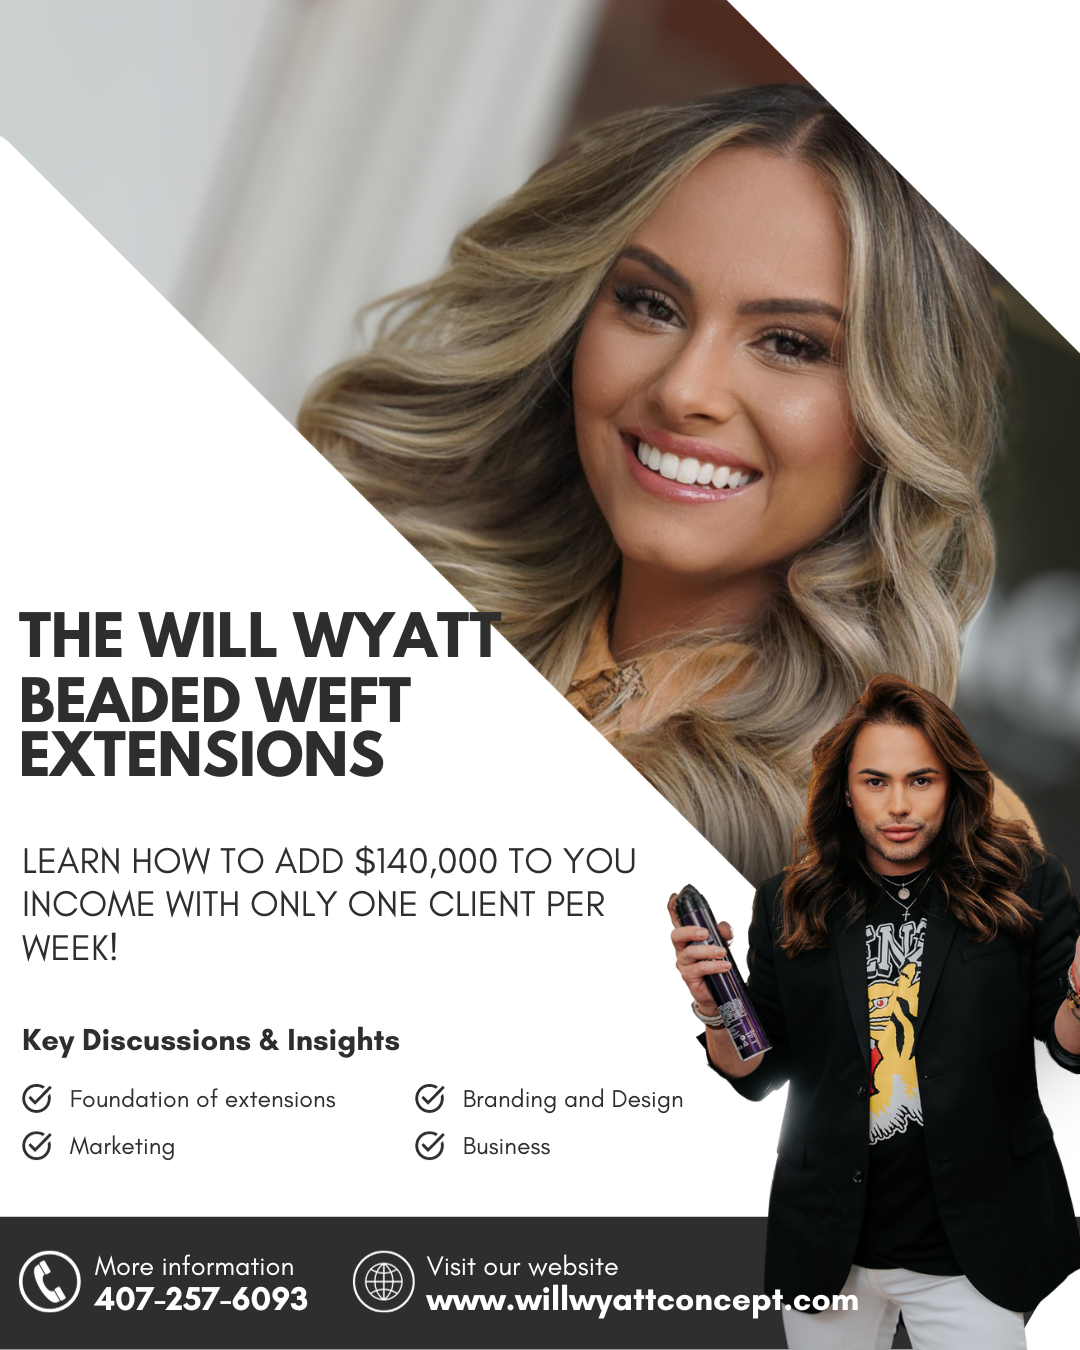 The Ultimate Beaded Weft Extensions Class